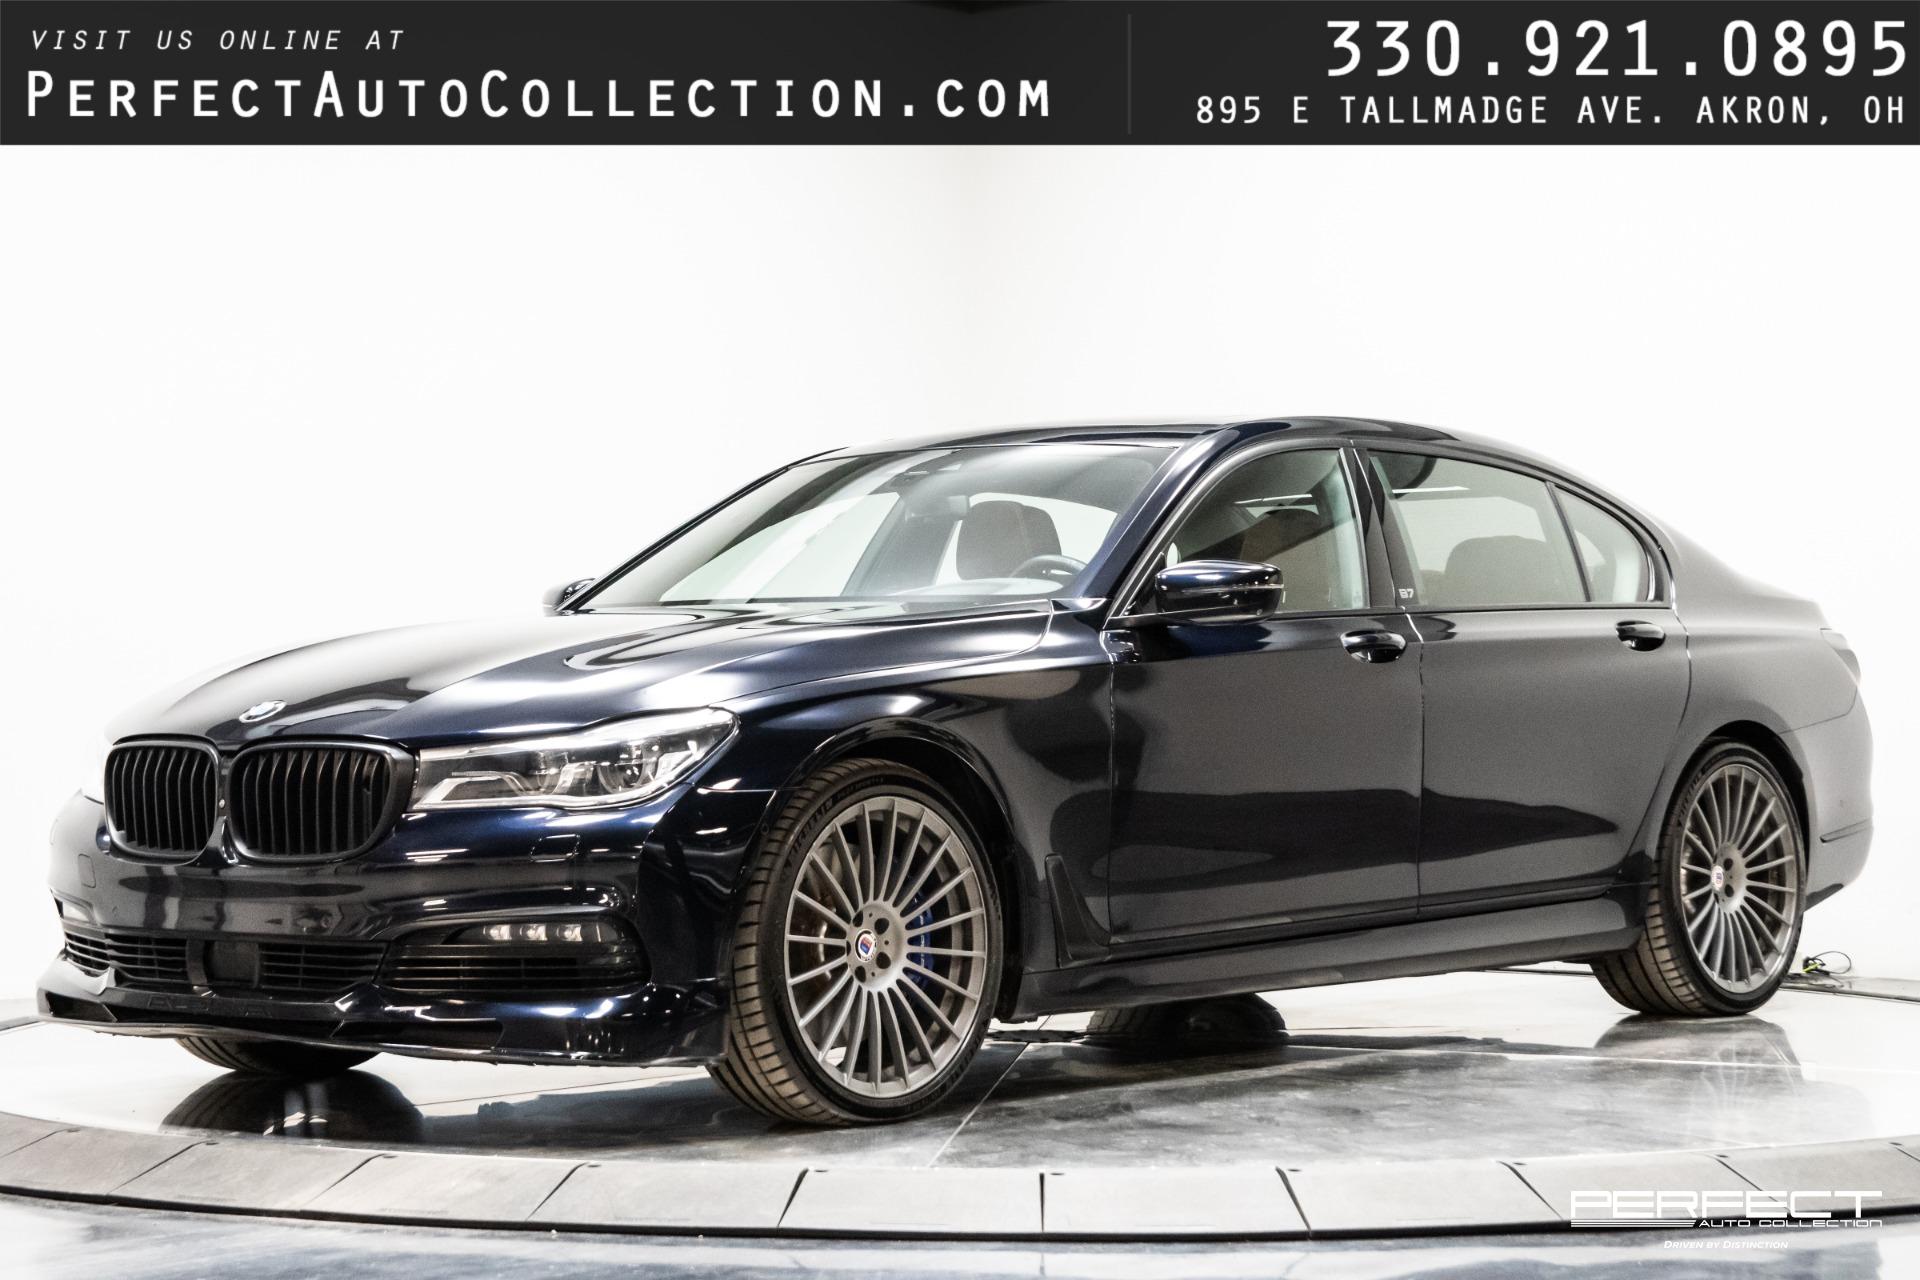 Used 2018 BMW 7 Series ALPINA B7 xDrive For Sale (Sold) | Perfect 